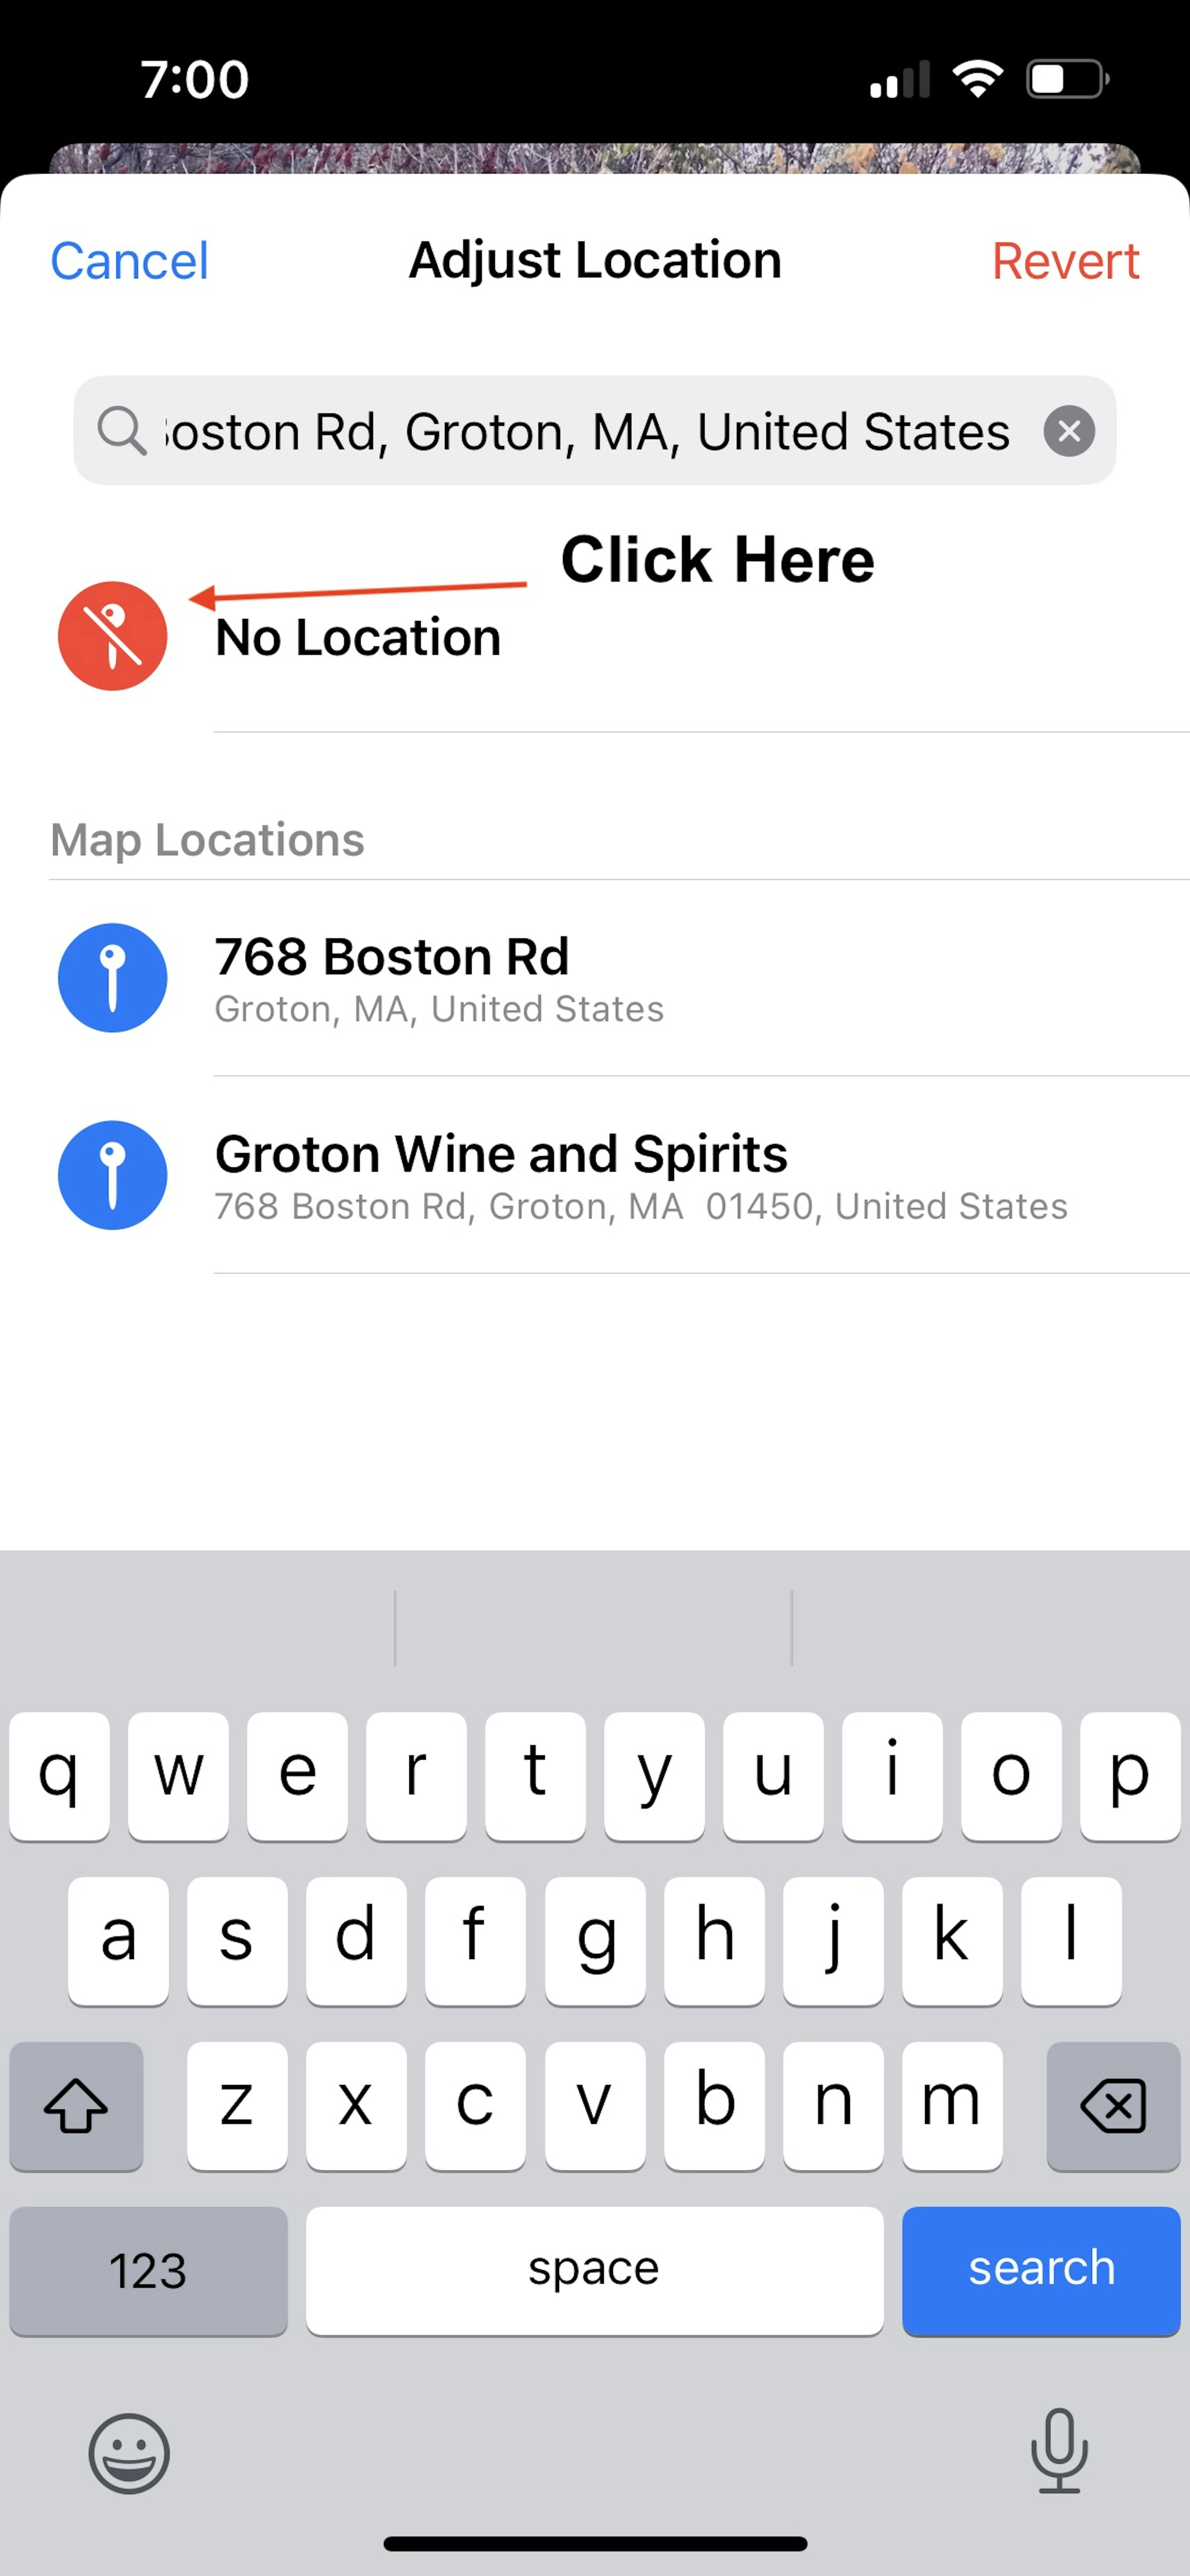 Removing the Geolocation Data